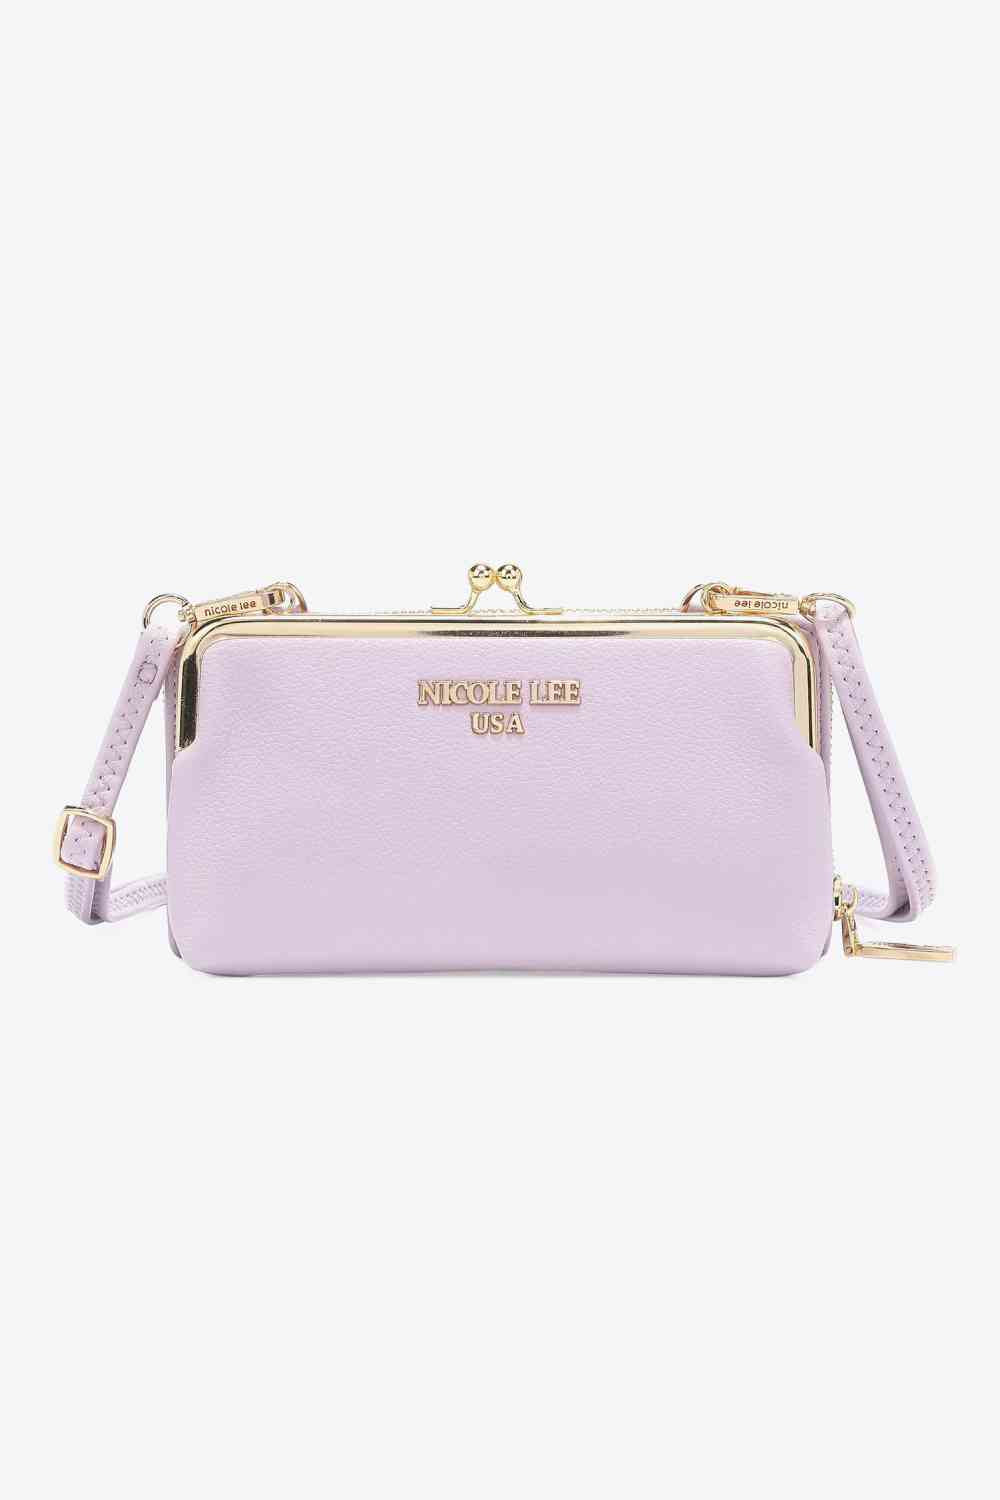 Nicole Lee USA Night Out Crossbody Wallet Purse Lavender One Size